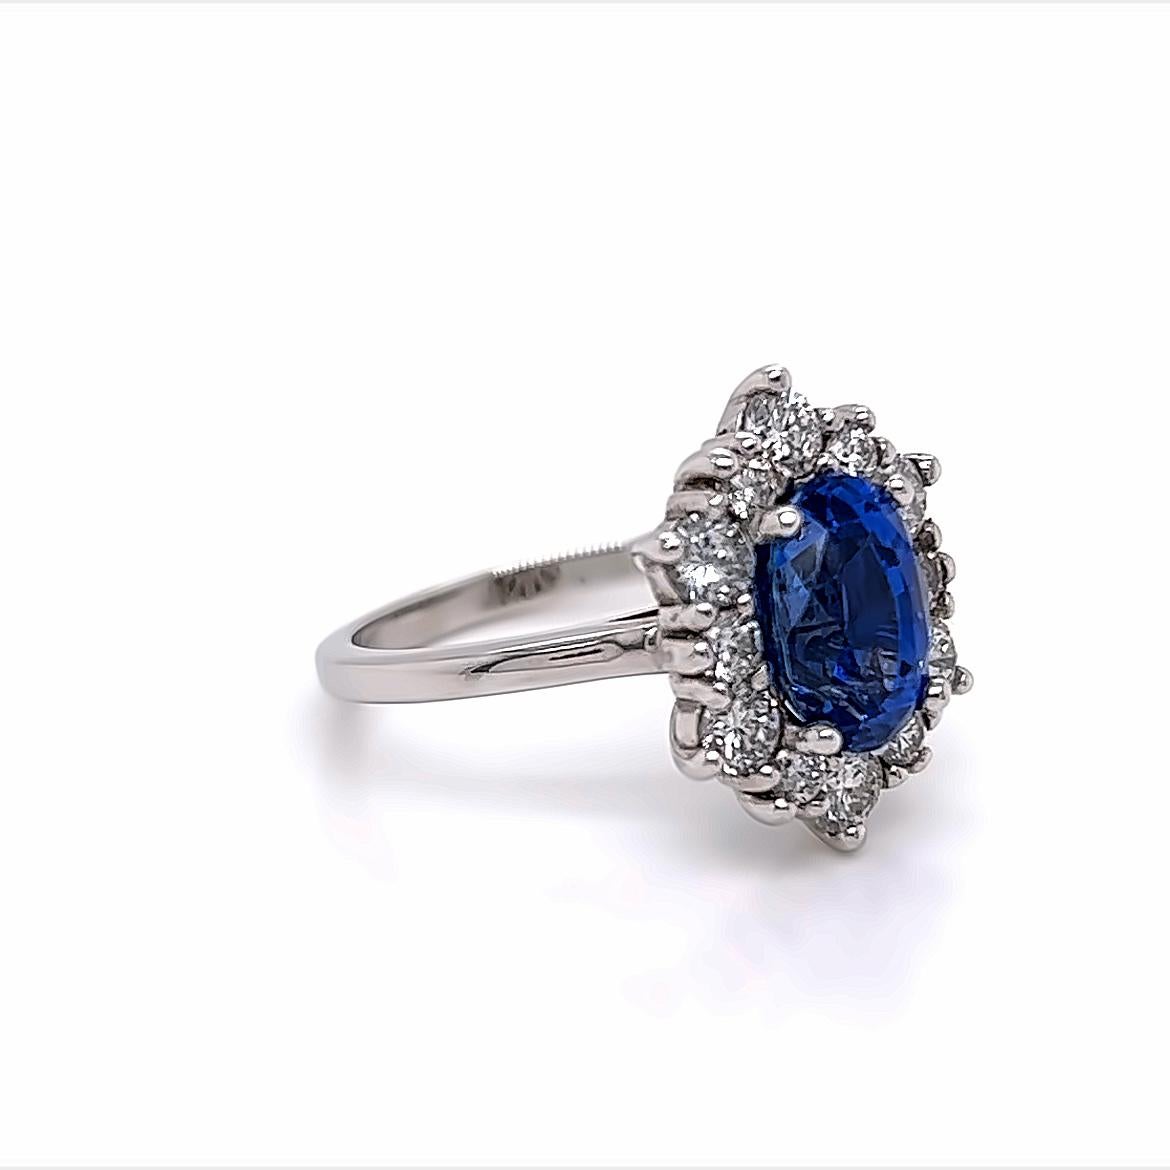 3.1 Carat Oval Blue Sapphire and Diamond Ring in Platinum In New Condition For Sale In London, GB